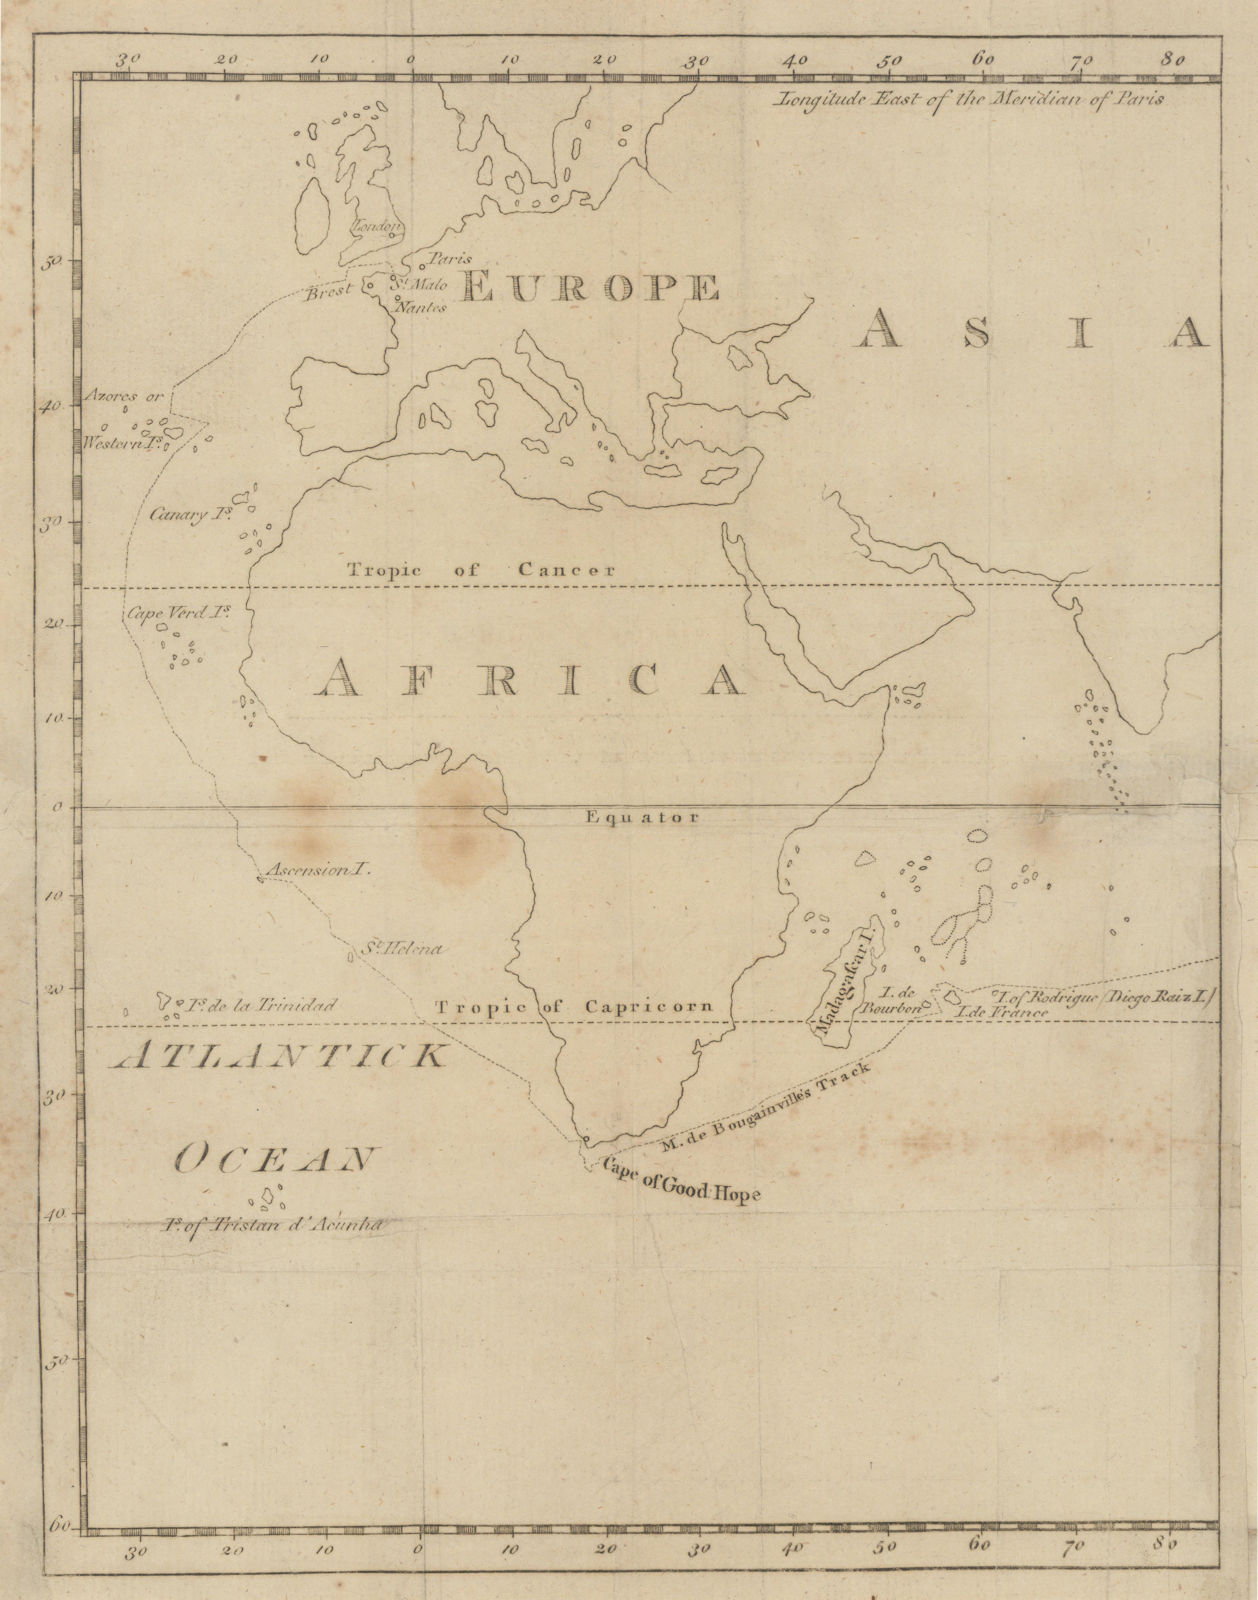 Bougainville's 1766 circumnavigation. France-Africa-Réunion. GENTS MAG 1774 map